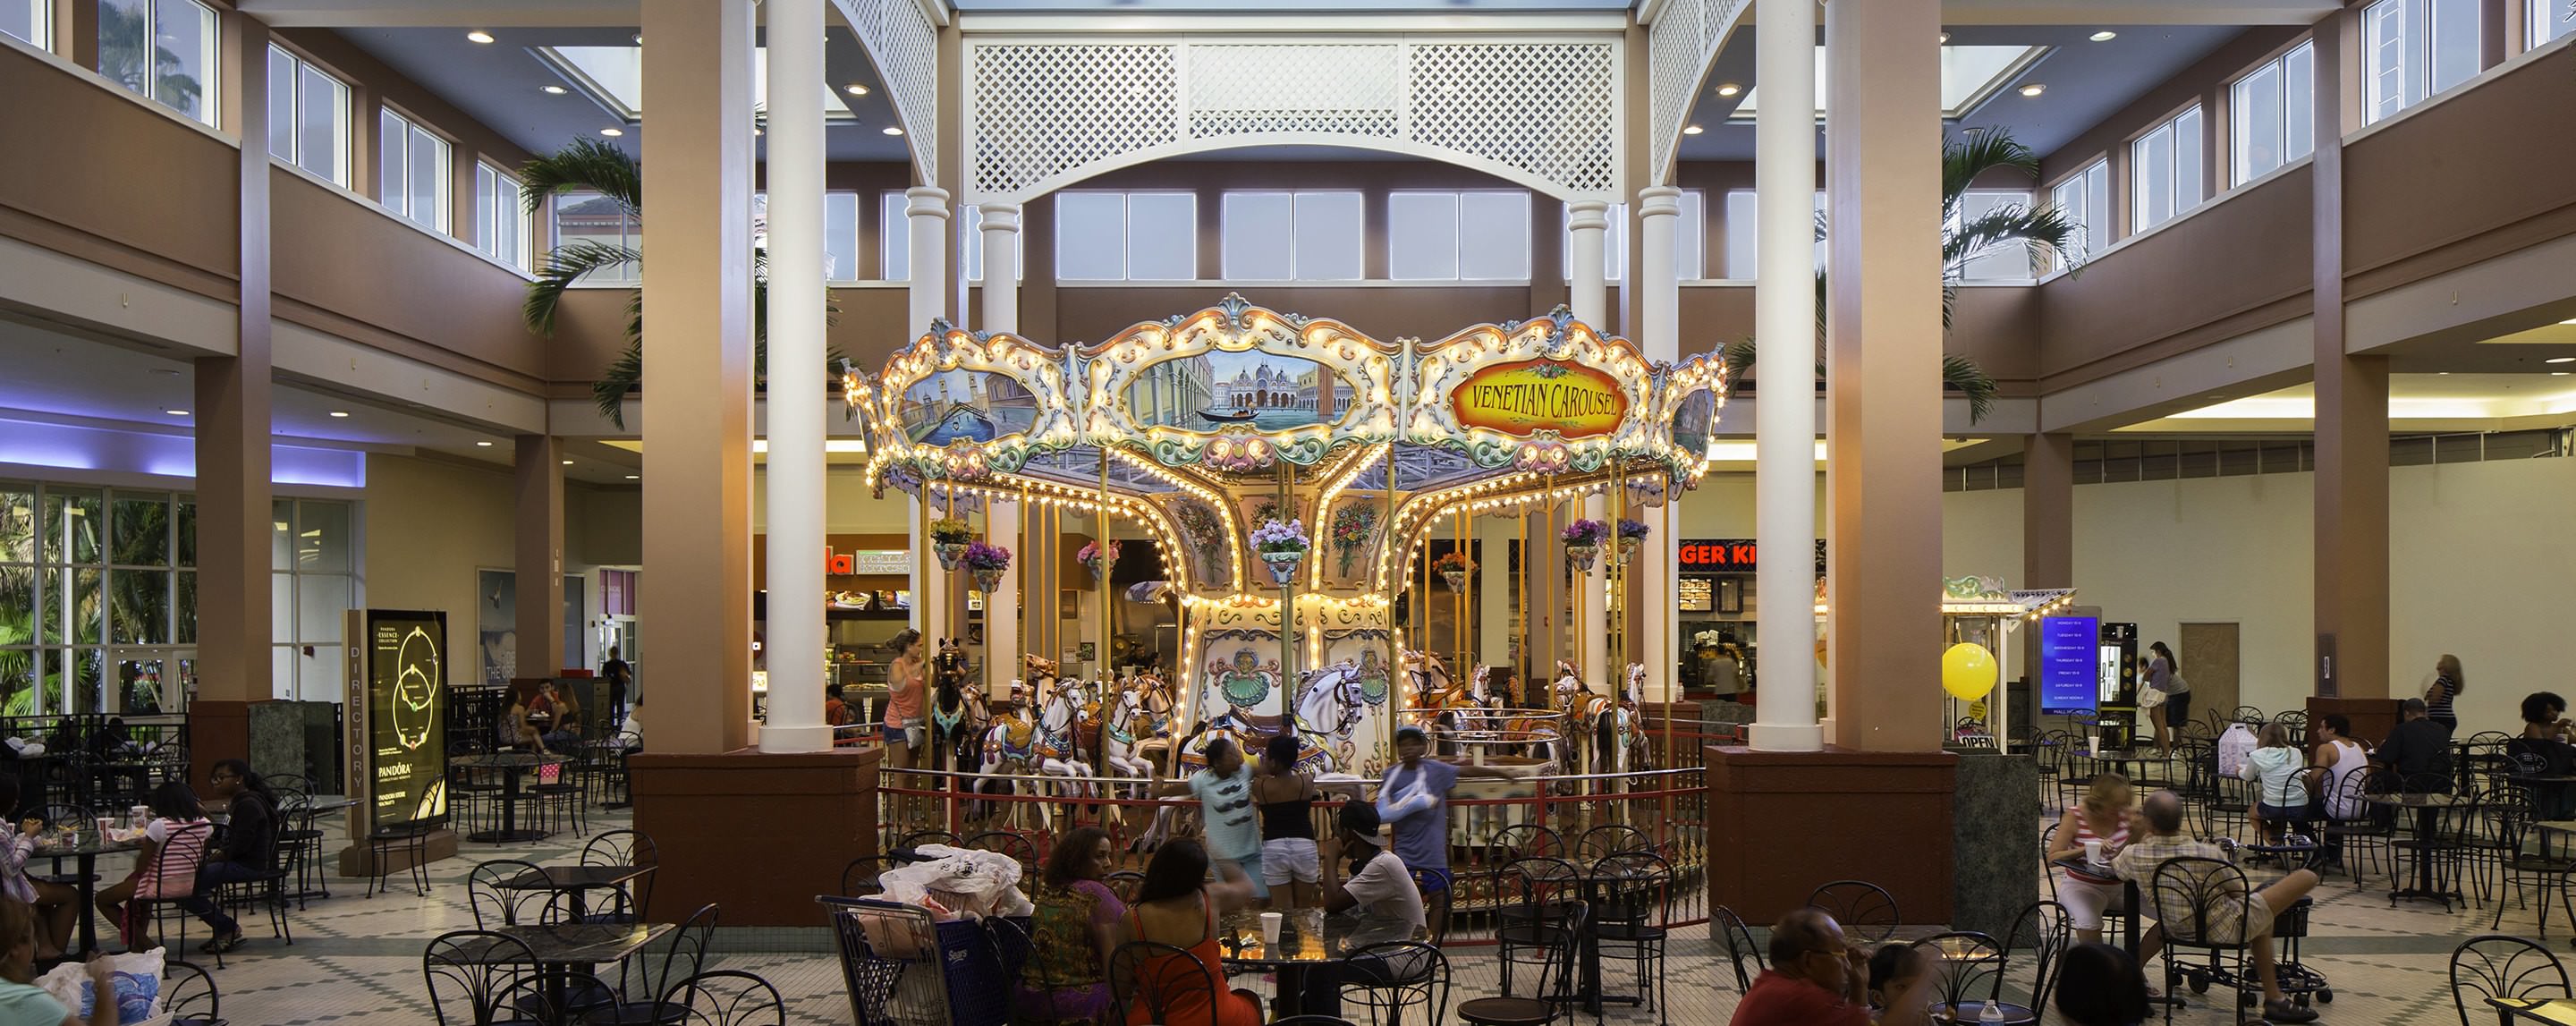 A group of tables stands in front of a mall carousel. A Sears storefront is visible.